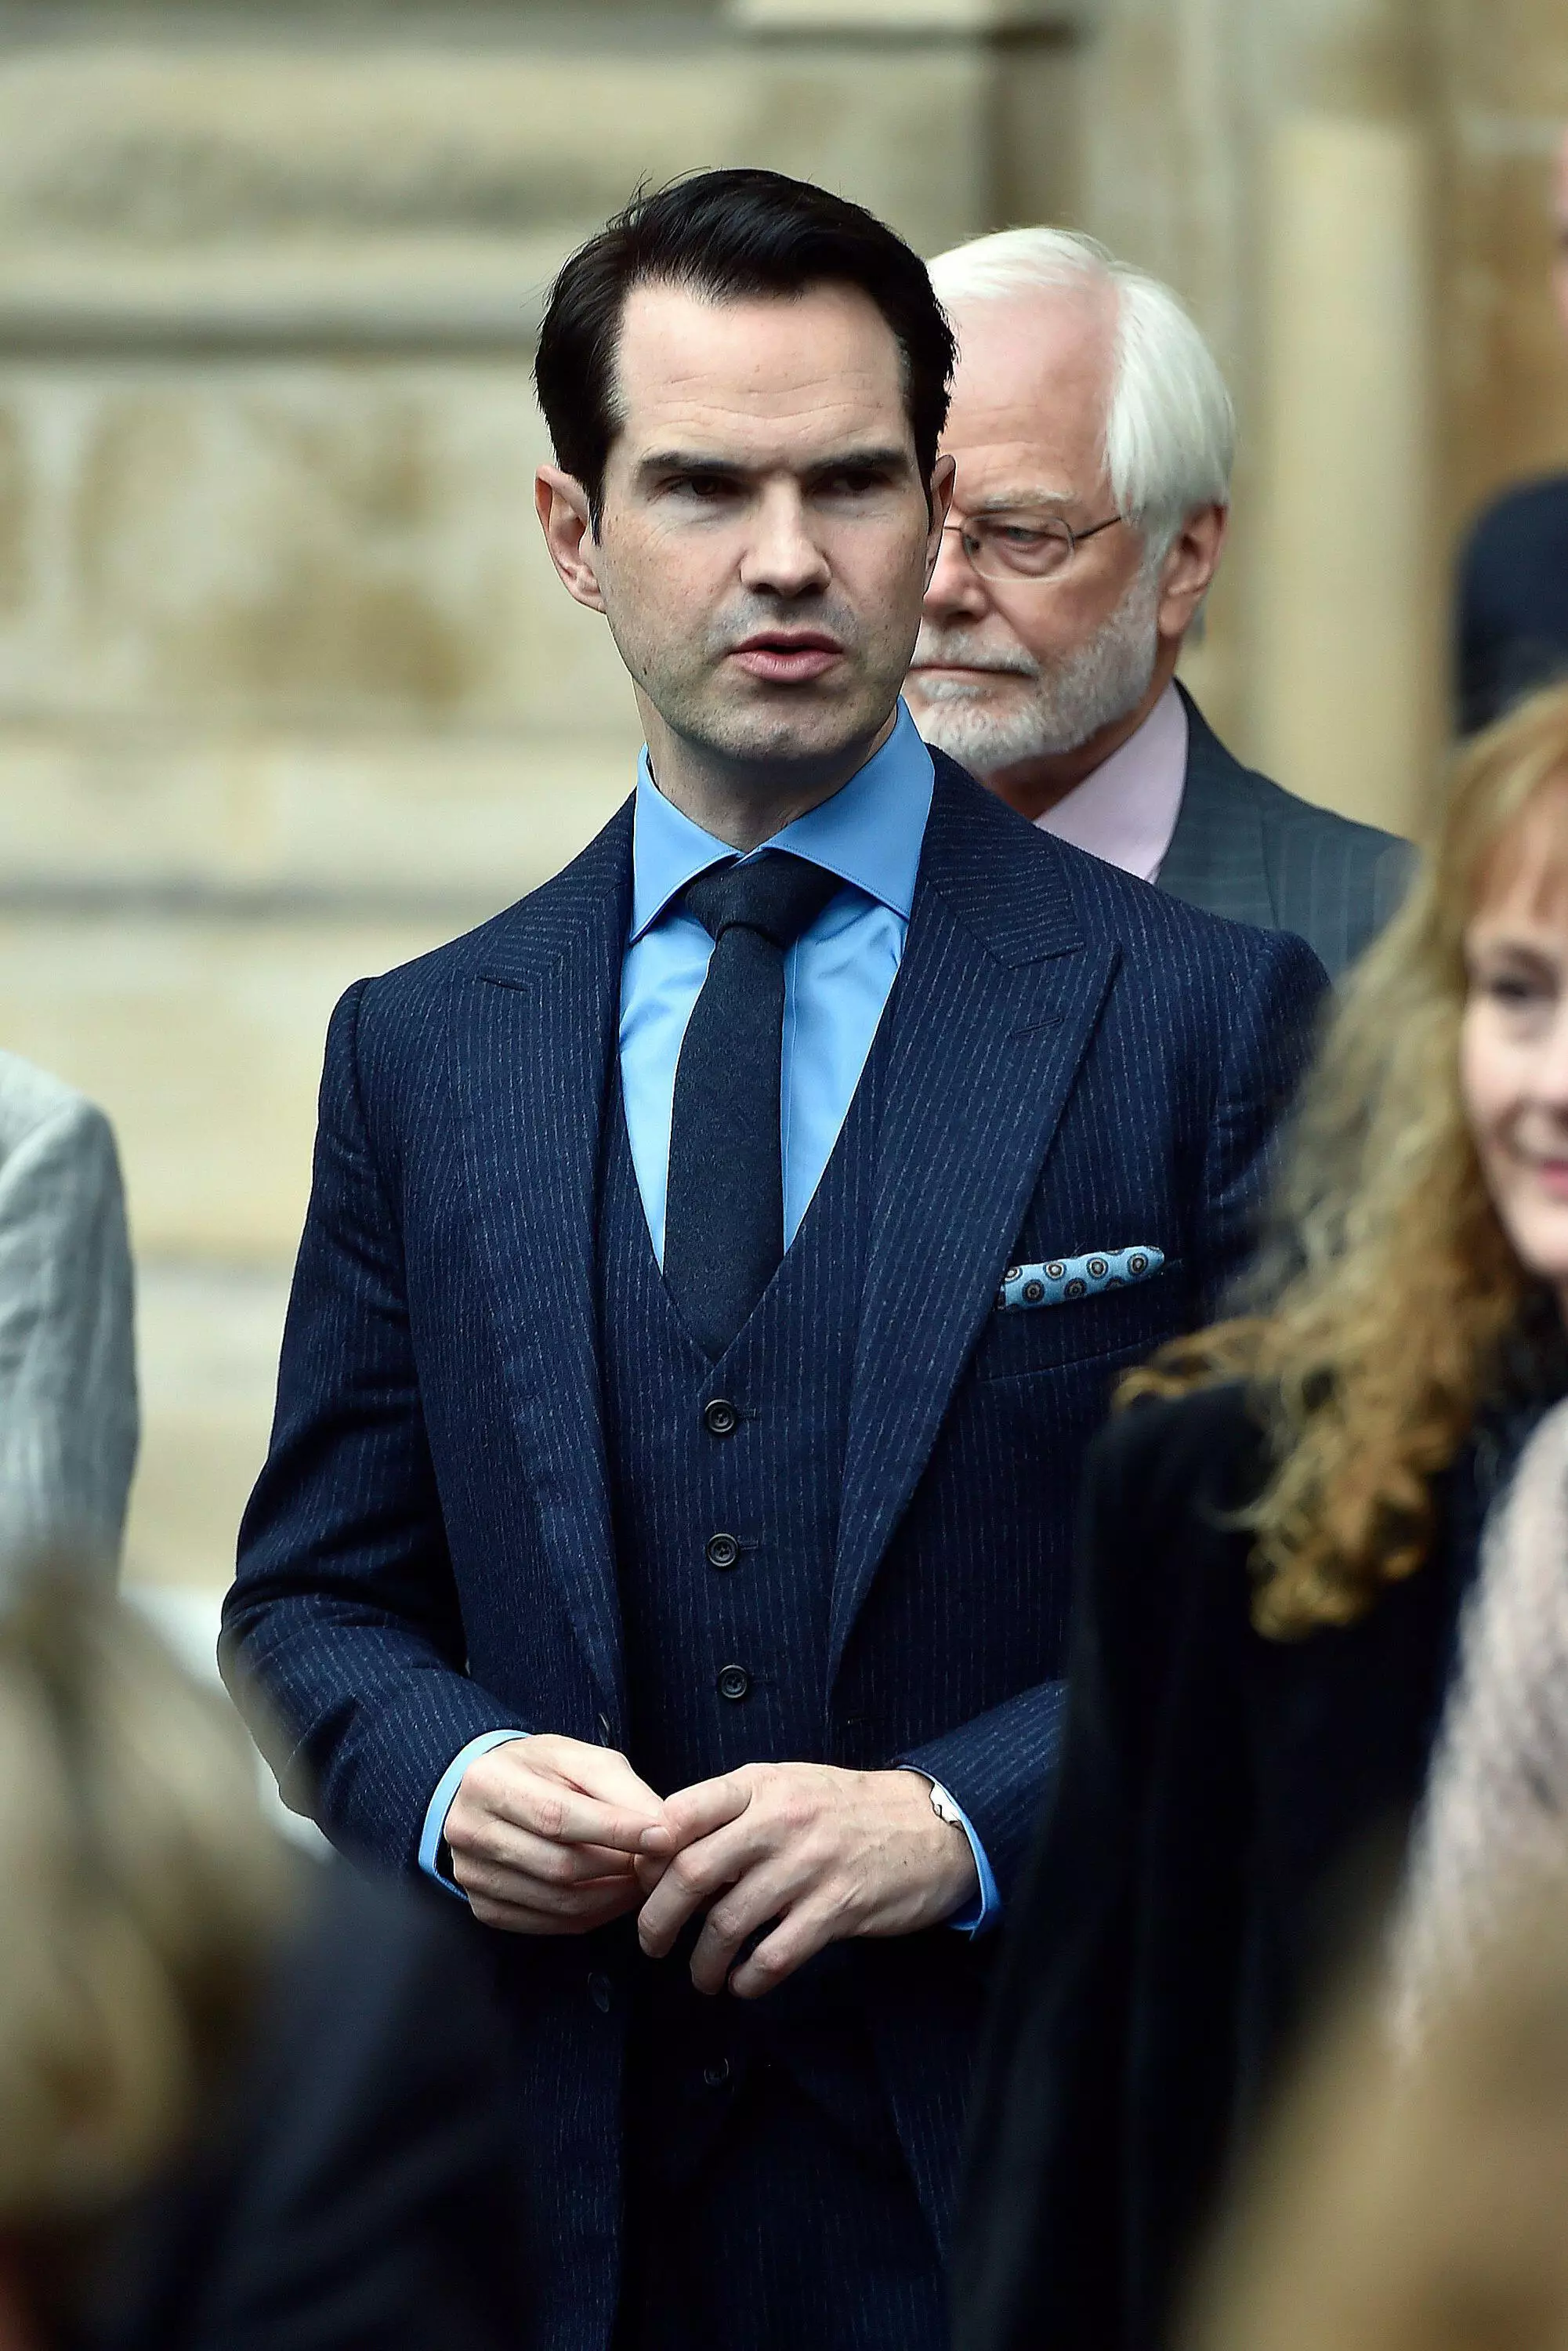 Jimmy Carr thinks this 'overreaction' has been accelerated by social media.